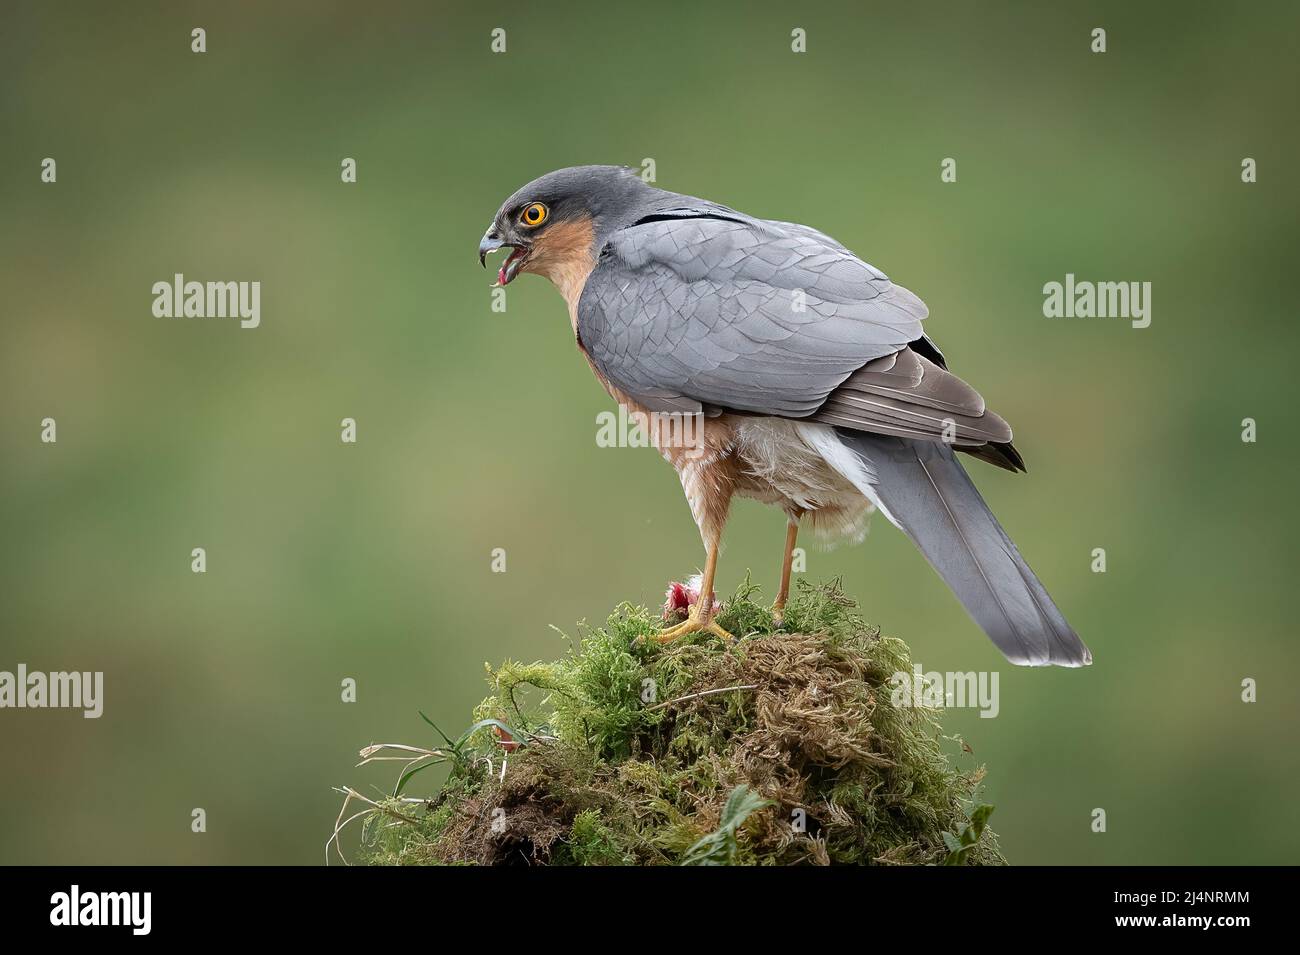 A close up of a feeding male sprrowhawk perched on top of a lichen covered tree trunk Stock Photo